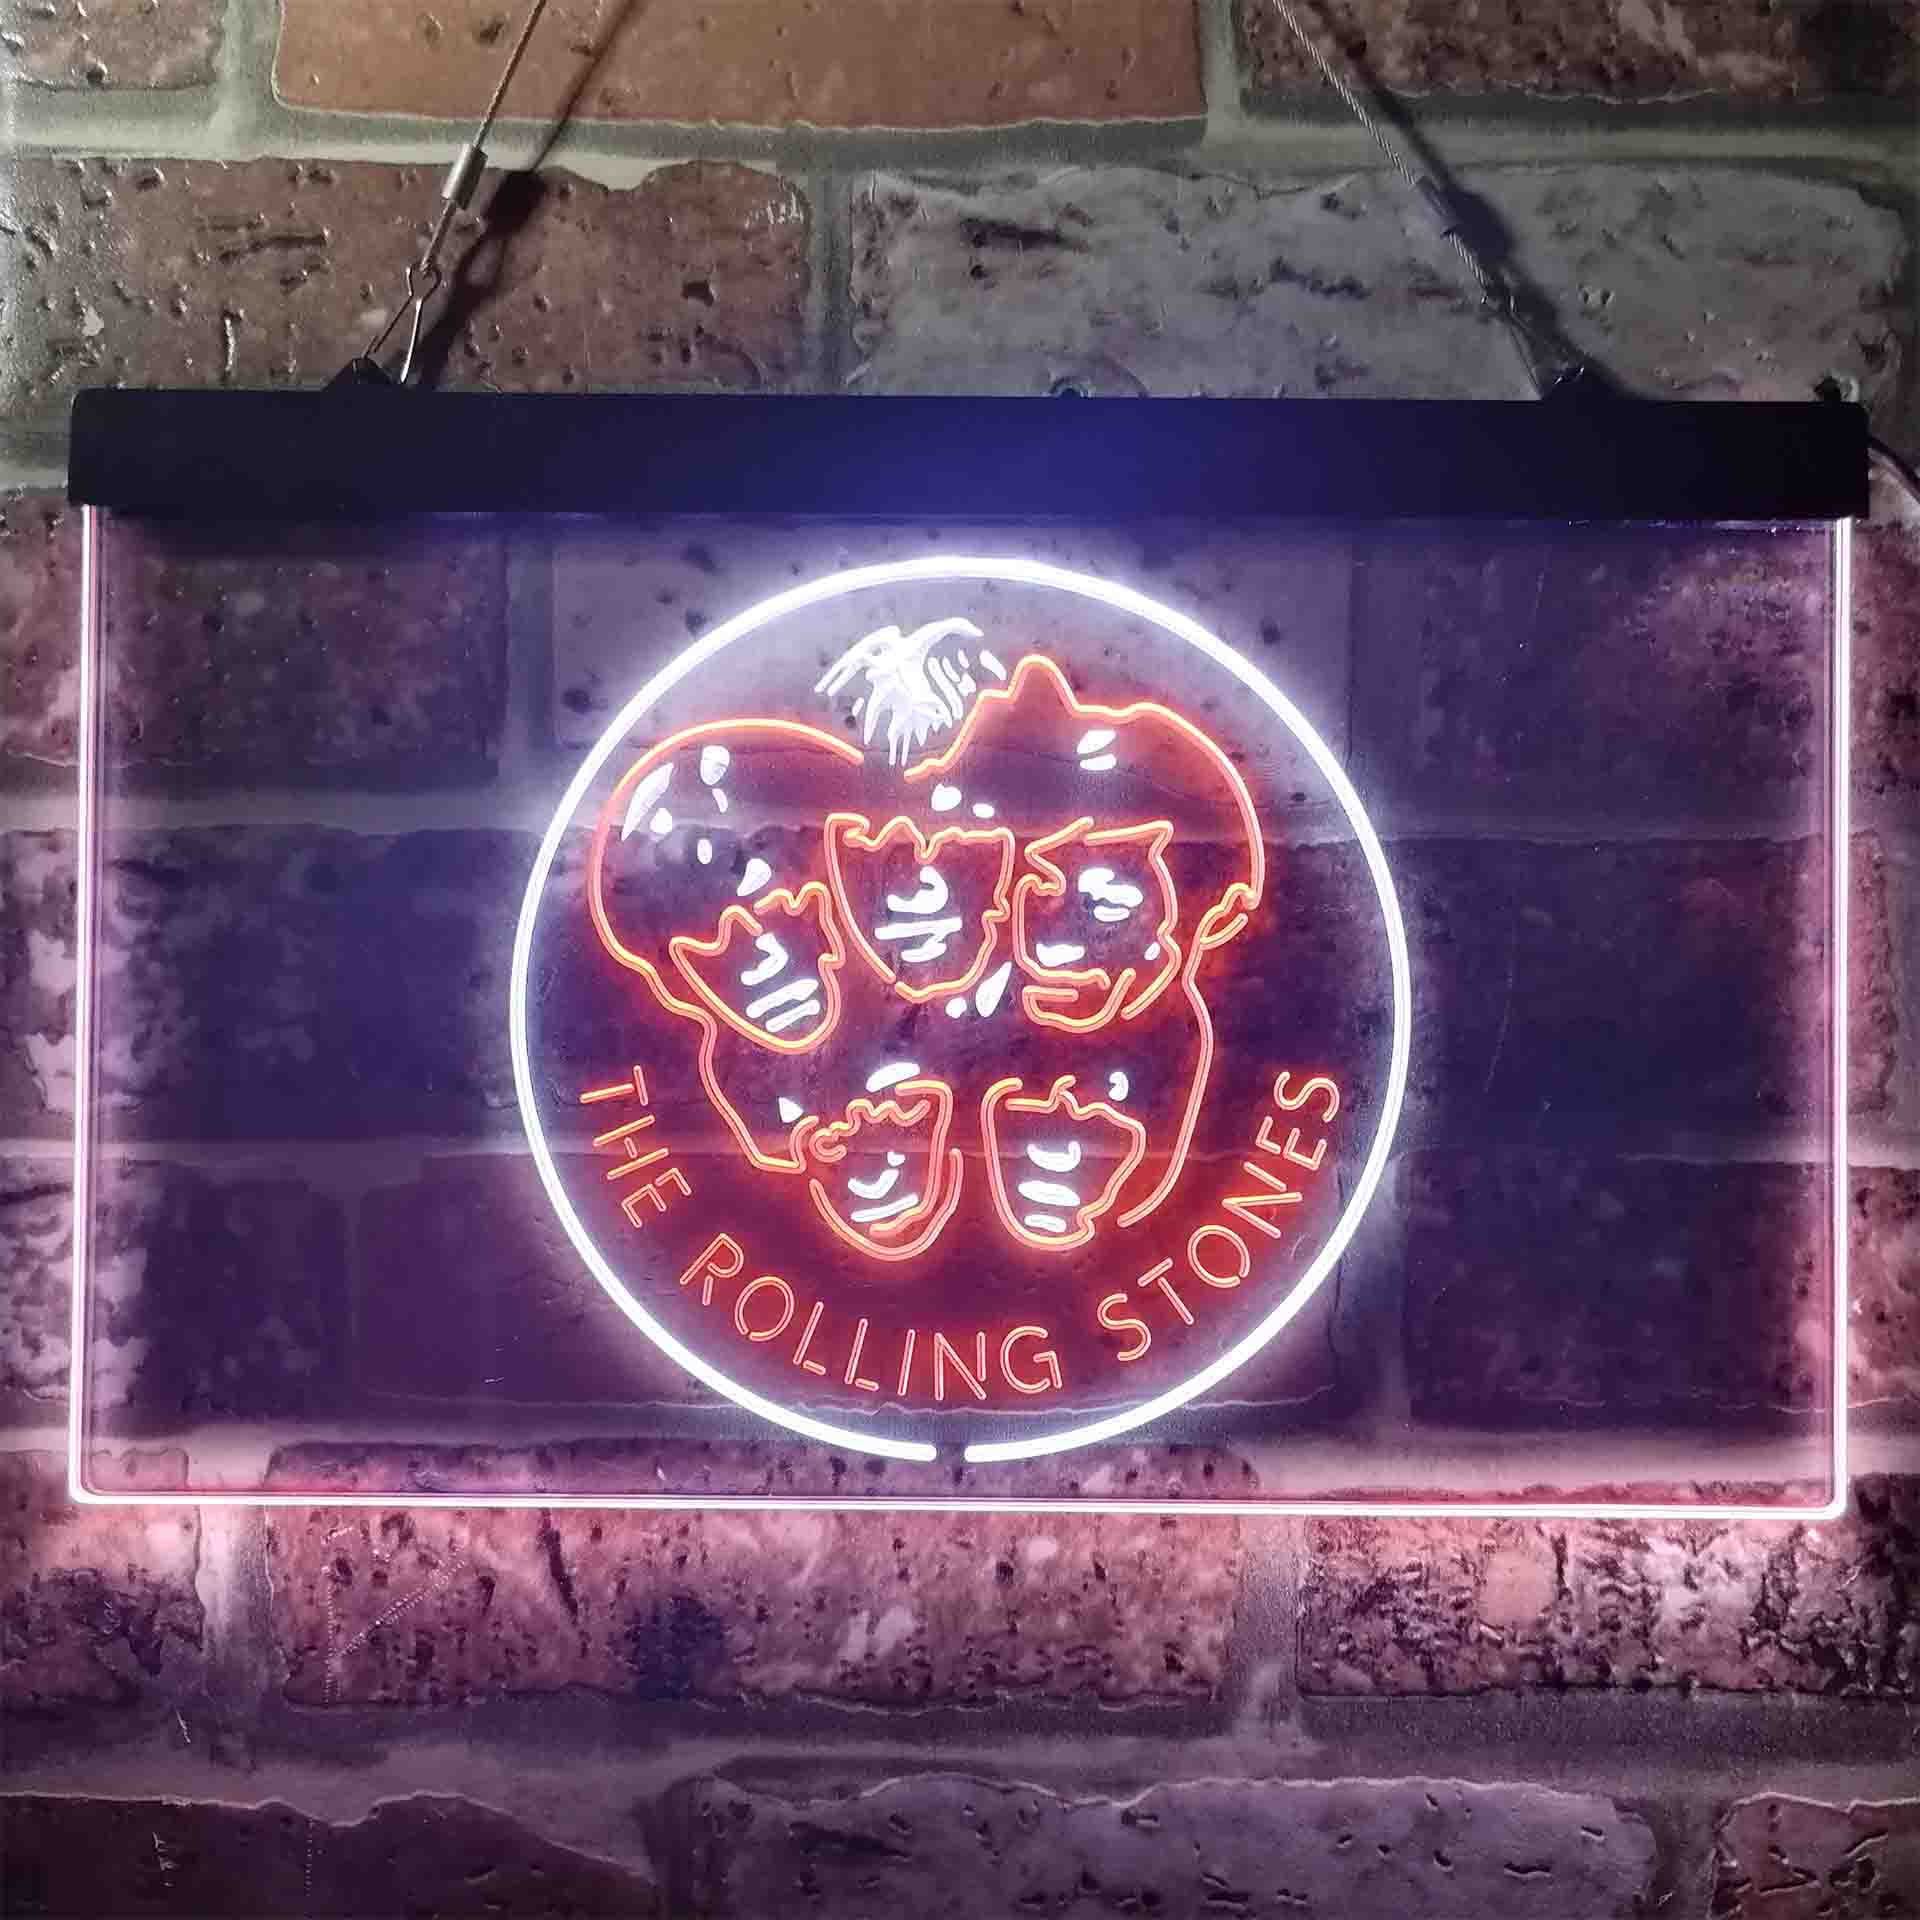 The Rolling Stones Heads Neon-Like LED Sign